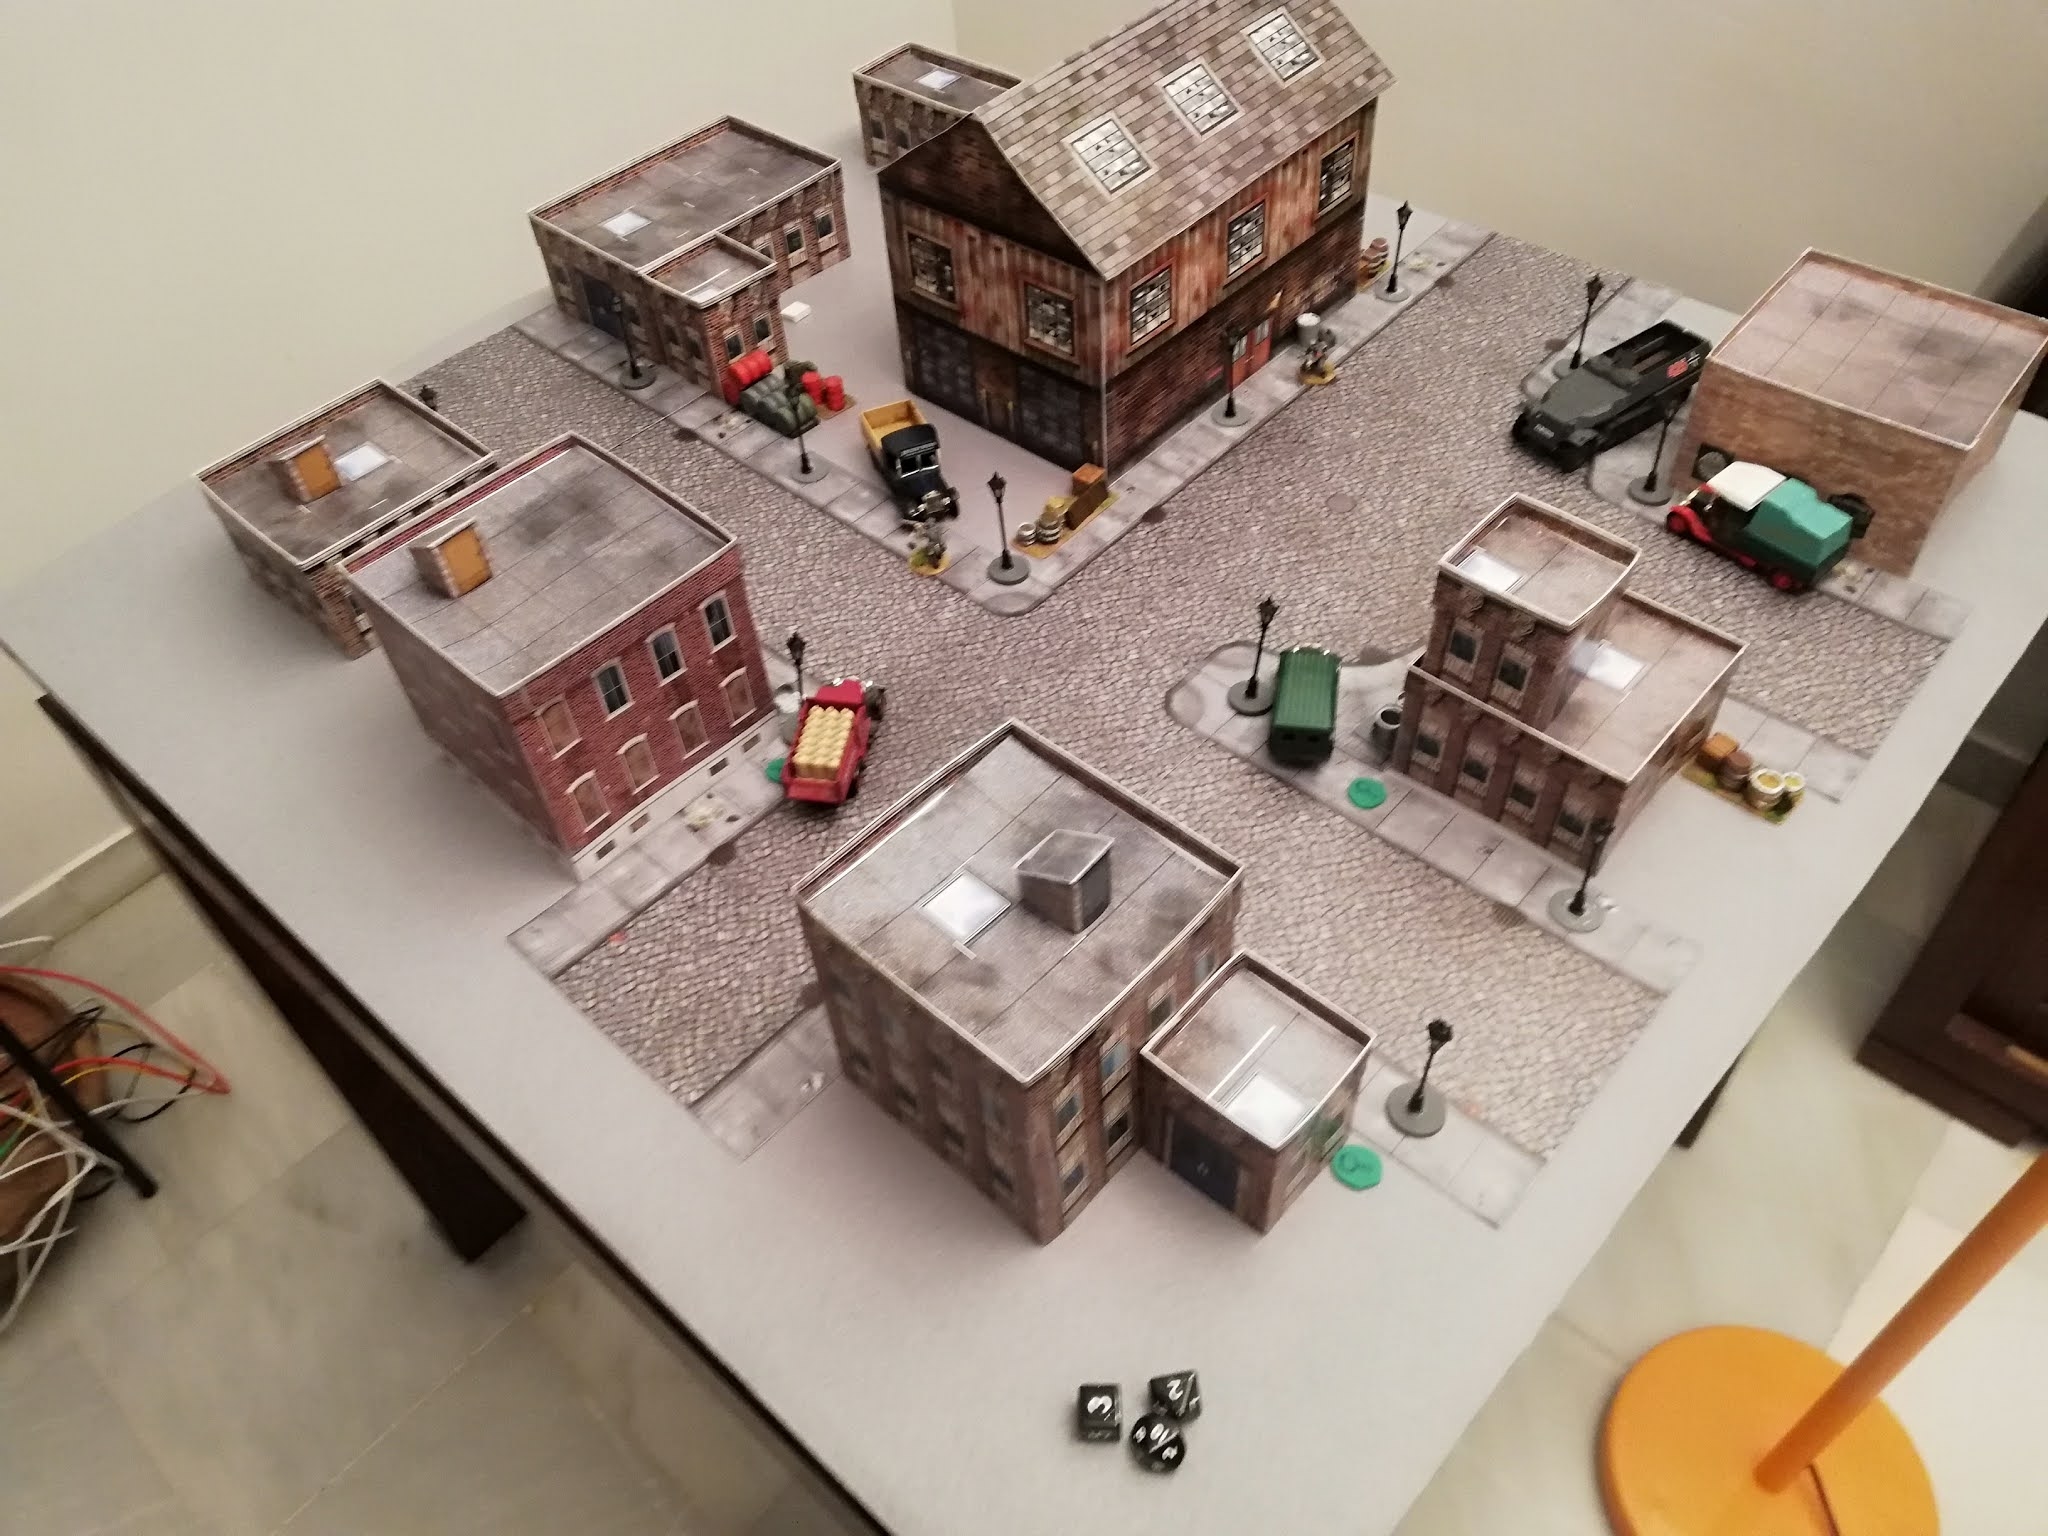 FEAR OF THE DARK SKIRMISH WARGAME PAPERCRAFT BUILDINGS AND TERRAIN IN 28MM